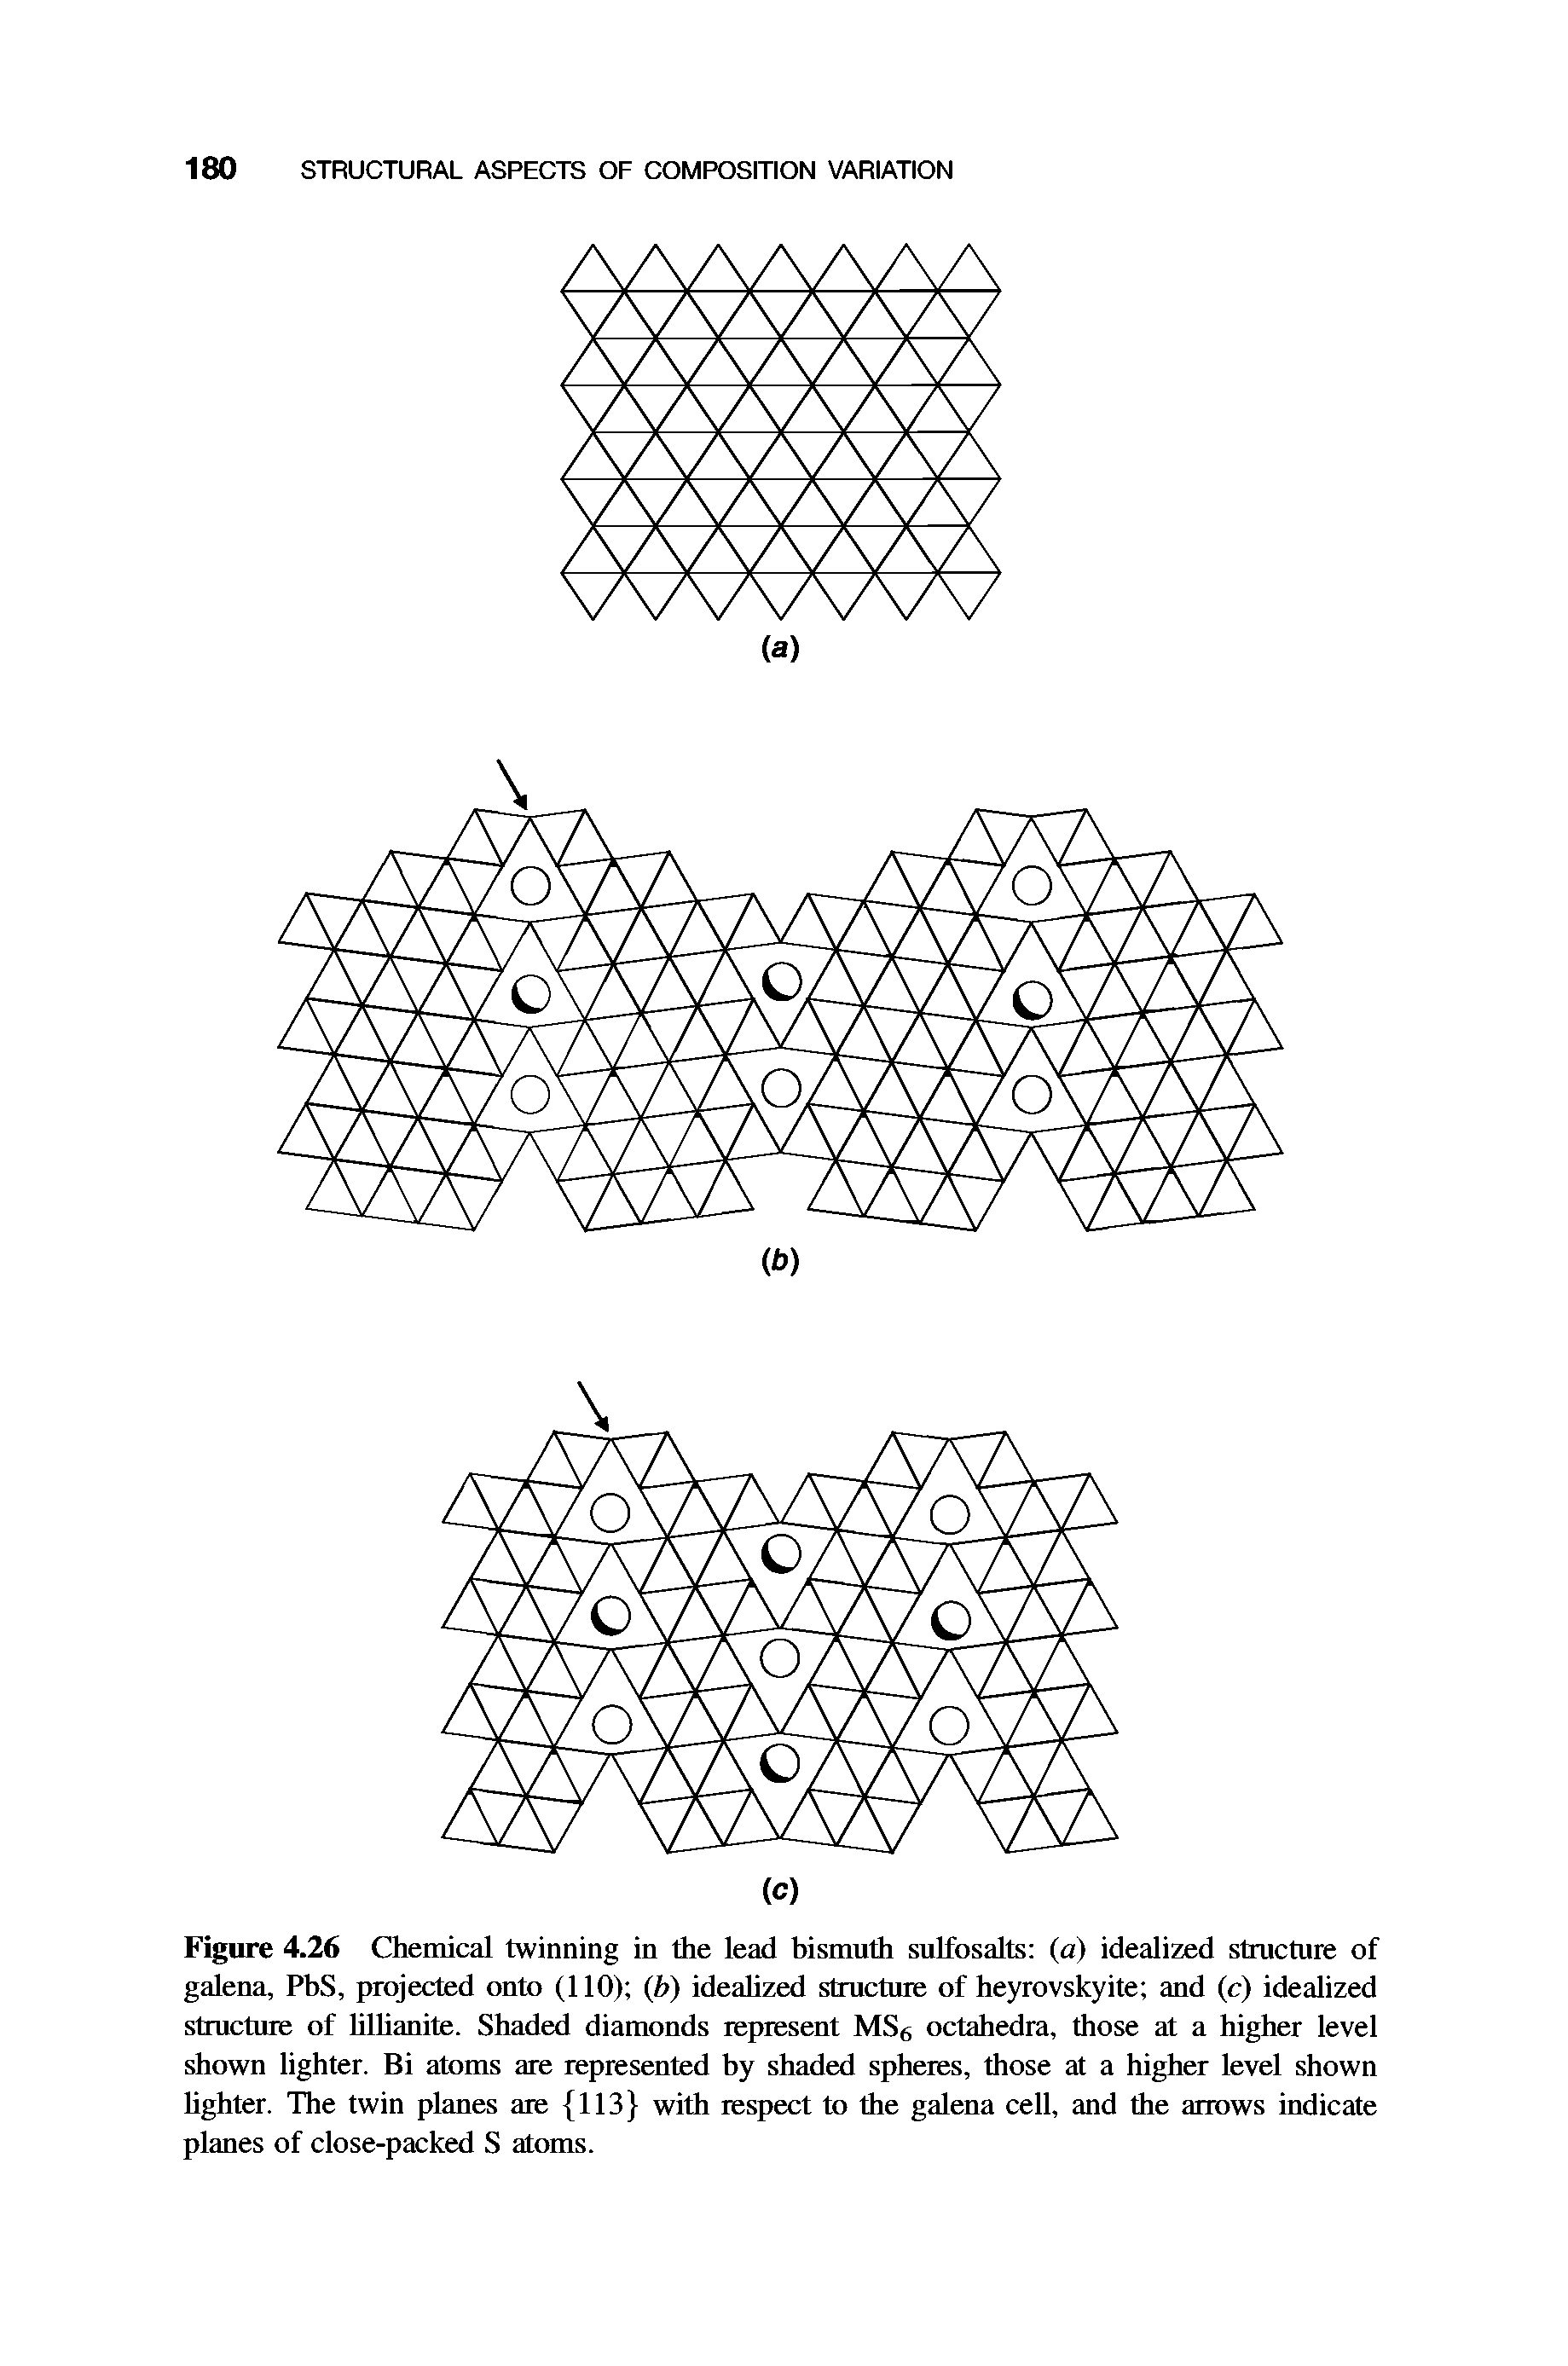 Figure 4.26 Chemical twinning in the lead bismuth sulfosalts (a) idealized structure of galena, PbS, projected onto (110) (b) idealized structure of heyrovskyite and (c) idealized structure of lillianite. Shaded diamonds represent MS6 octahedra, those at a higher level shown lighter. Bi atoms are represented by shaded spheres, those at a higher level shown lighter. The twin planes are 113 with respect to the galena cell, and the arrows indicate planes of close-packed S atoms.